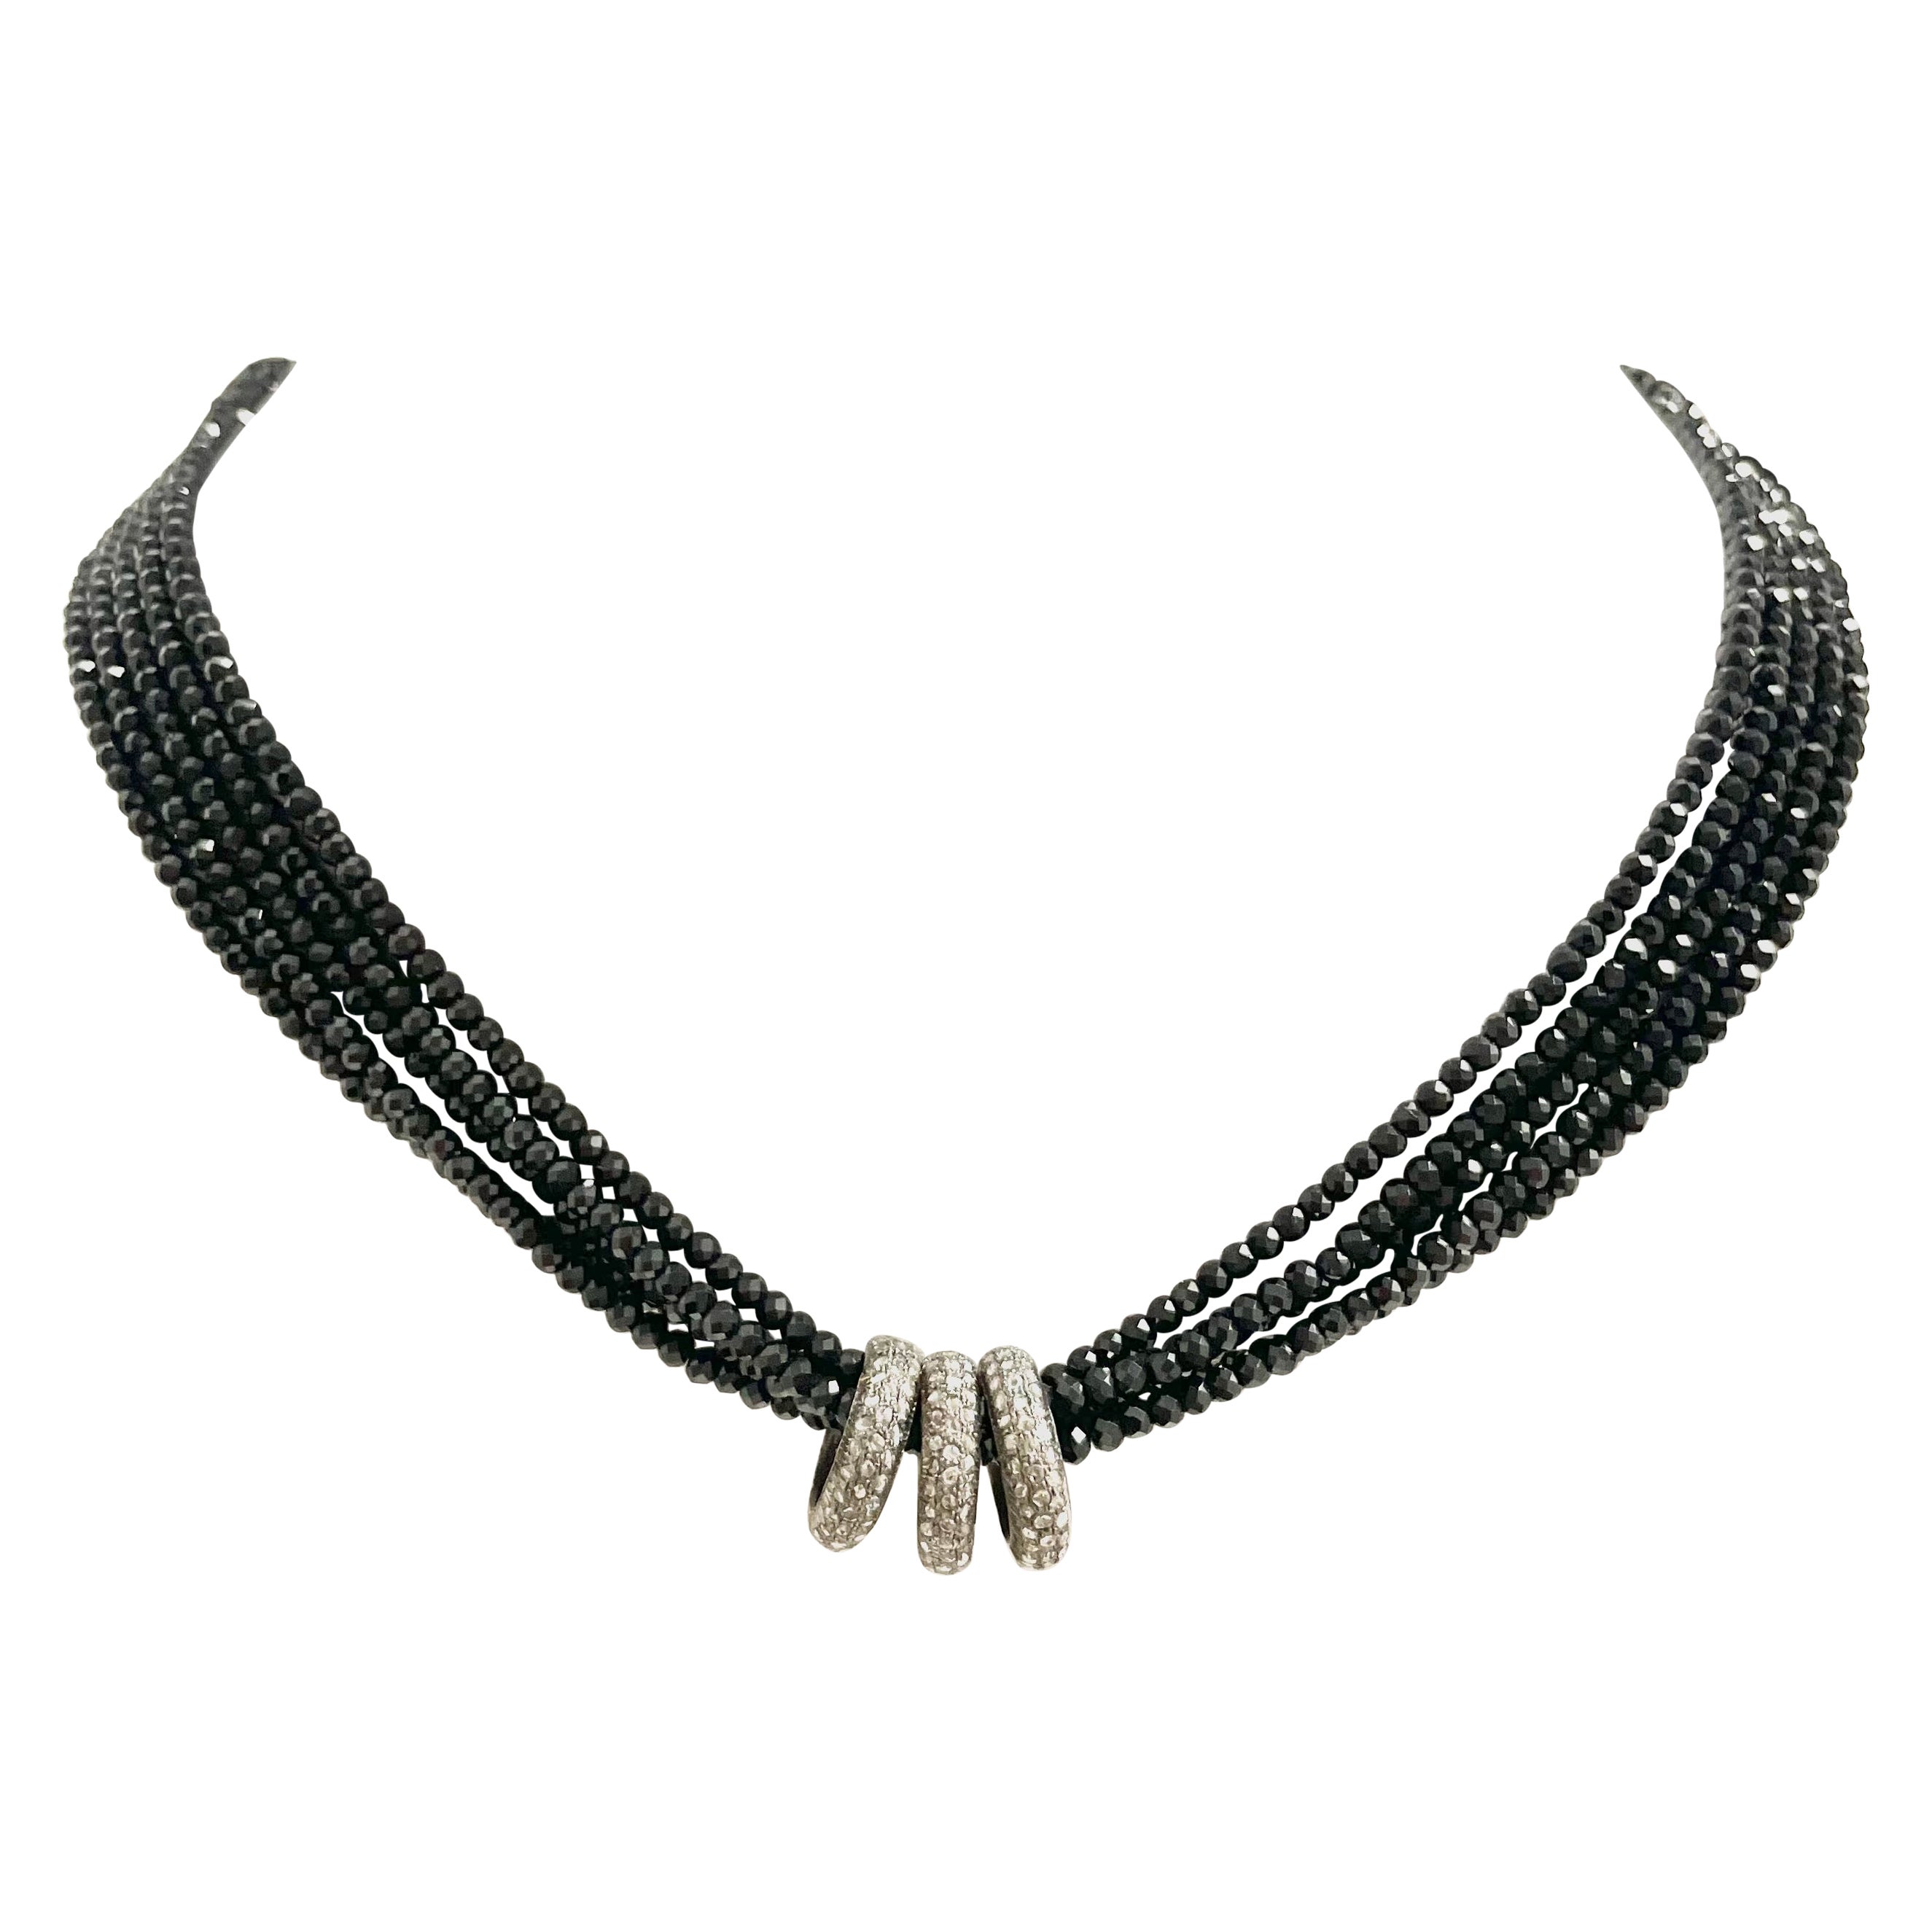 Black Spinel with Floating Pave Diamond Rings 5 Strand Necklace